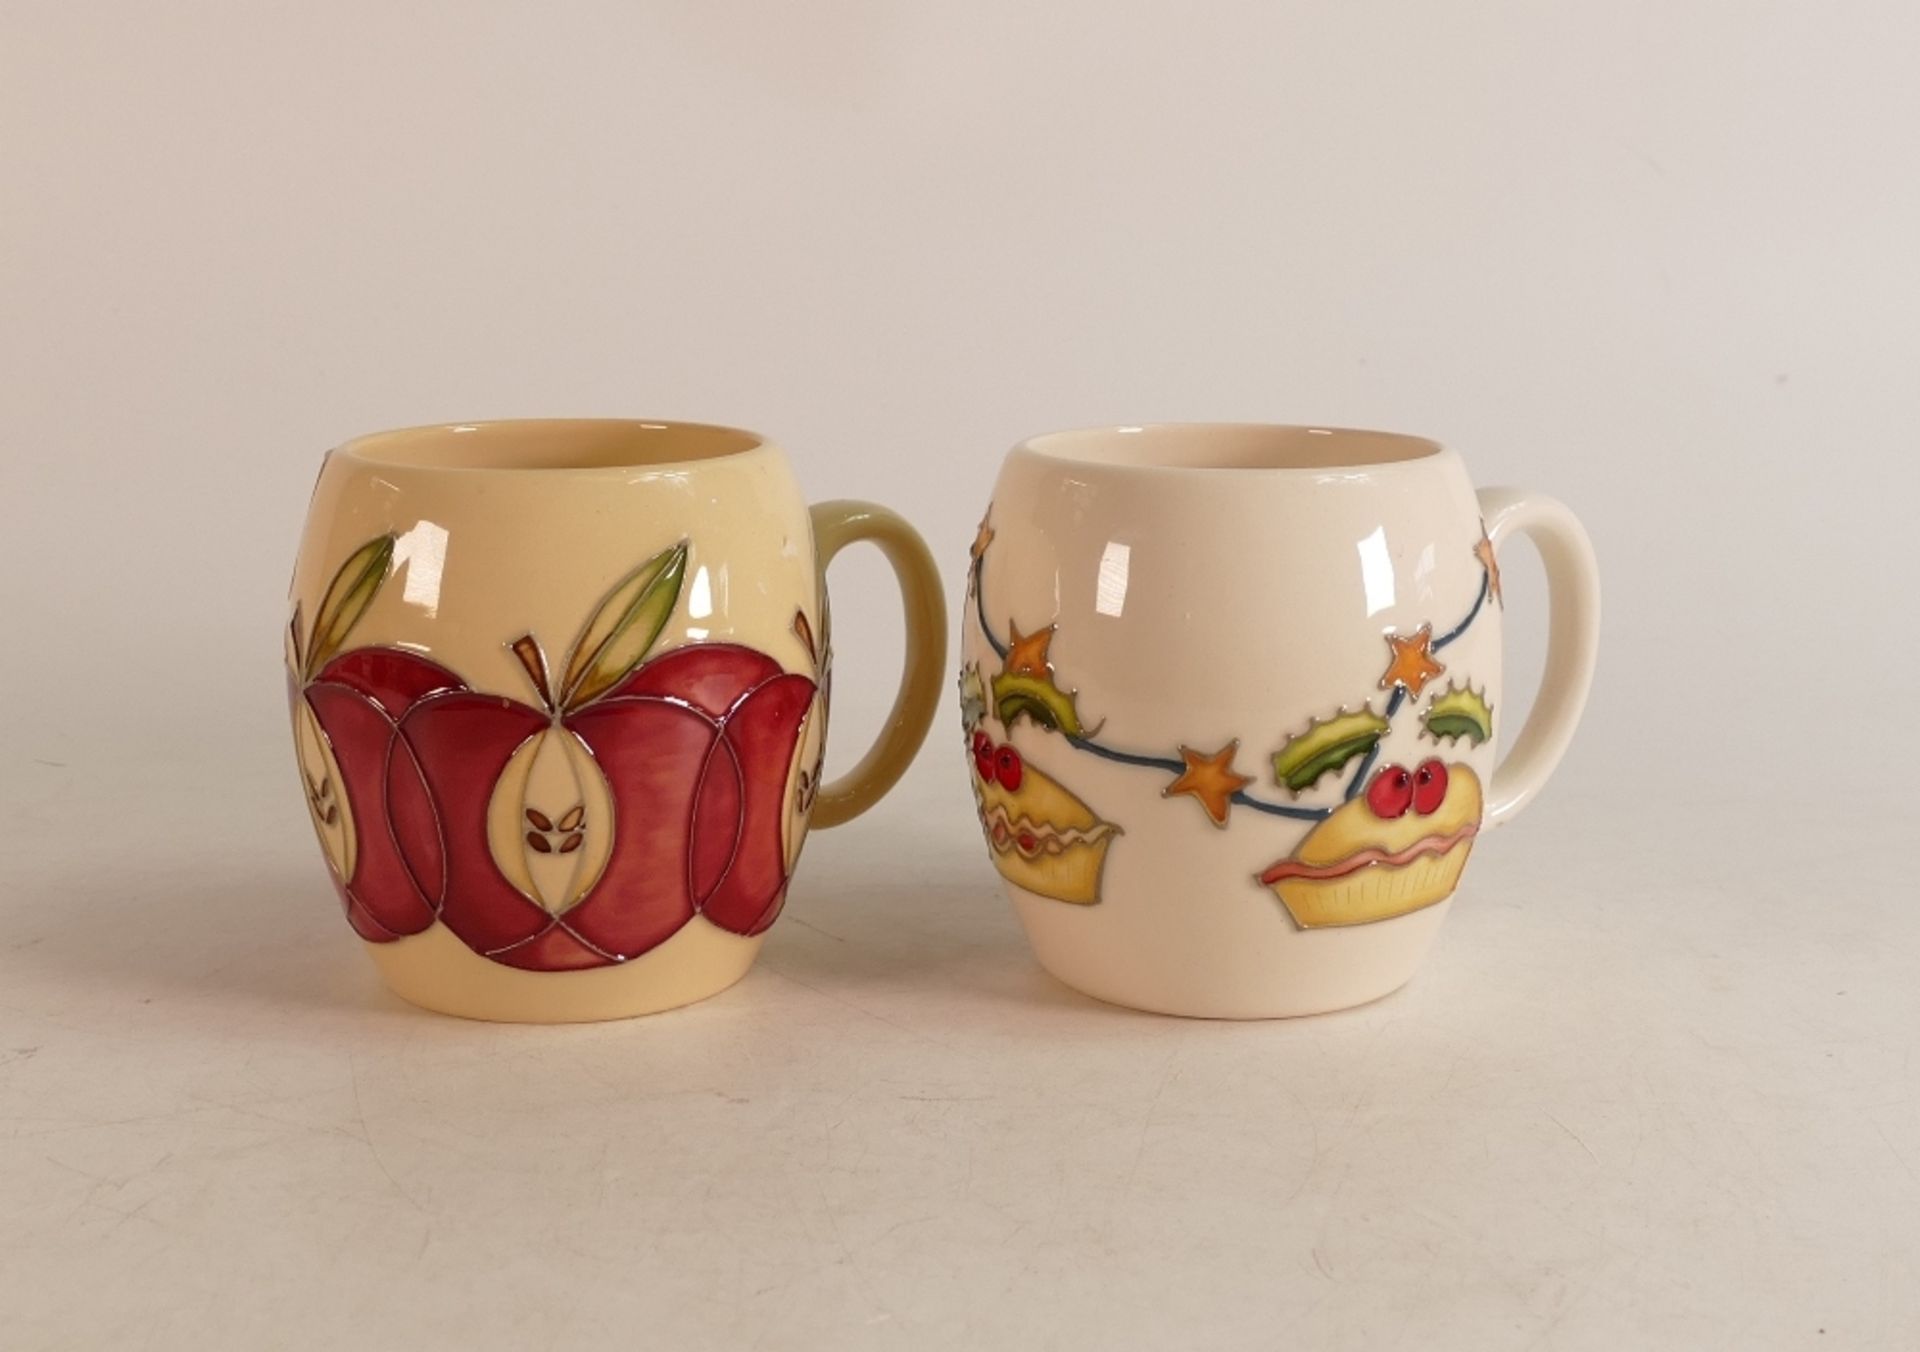 Two Moorcroft Mugs to include Apple and Christmas mug decorated with pies, holly and stars (2)